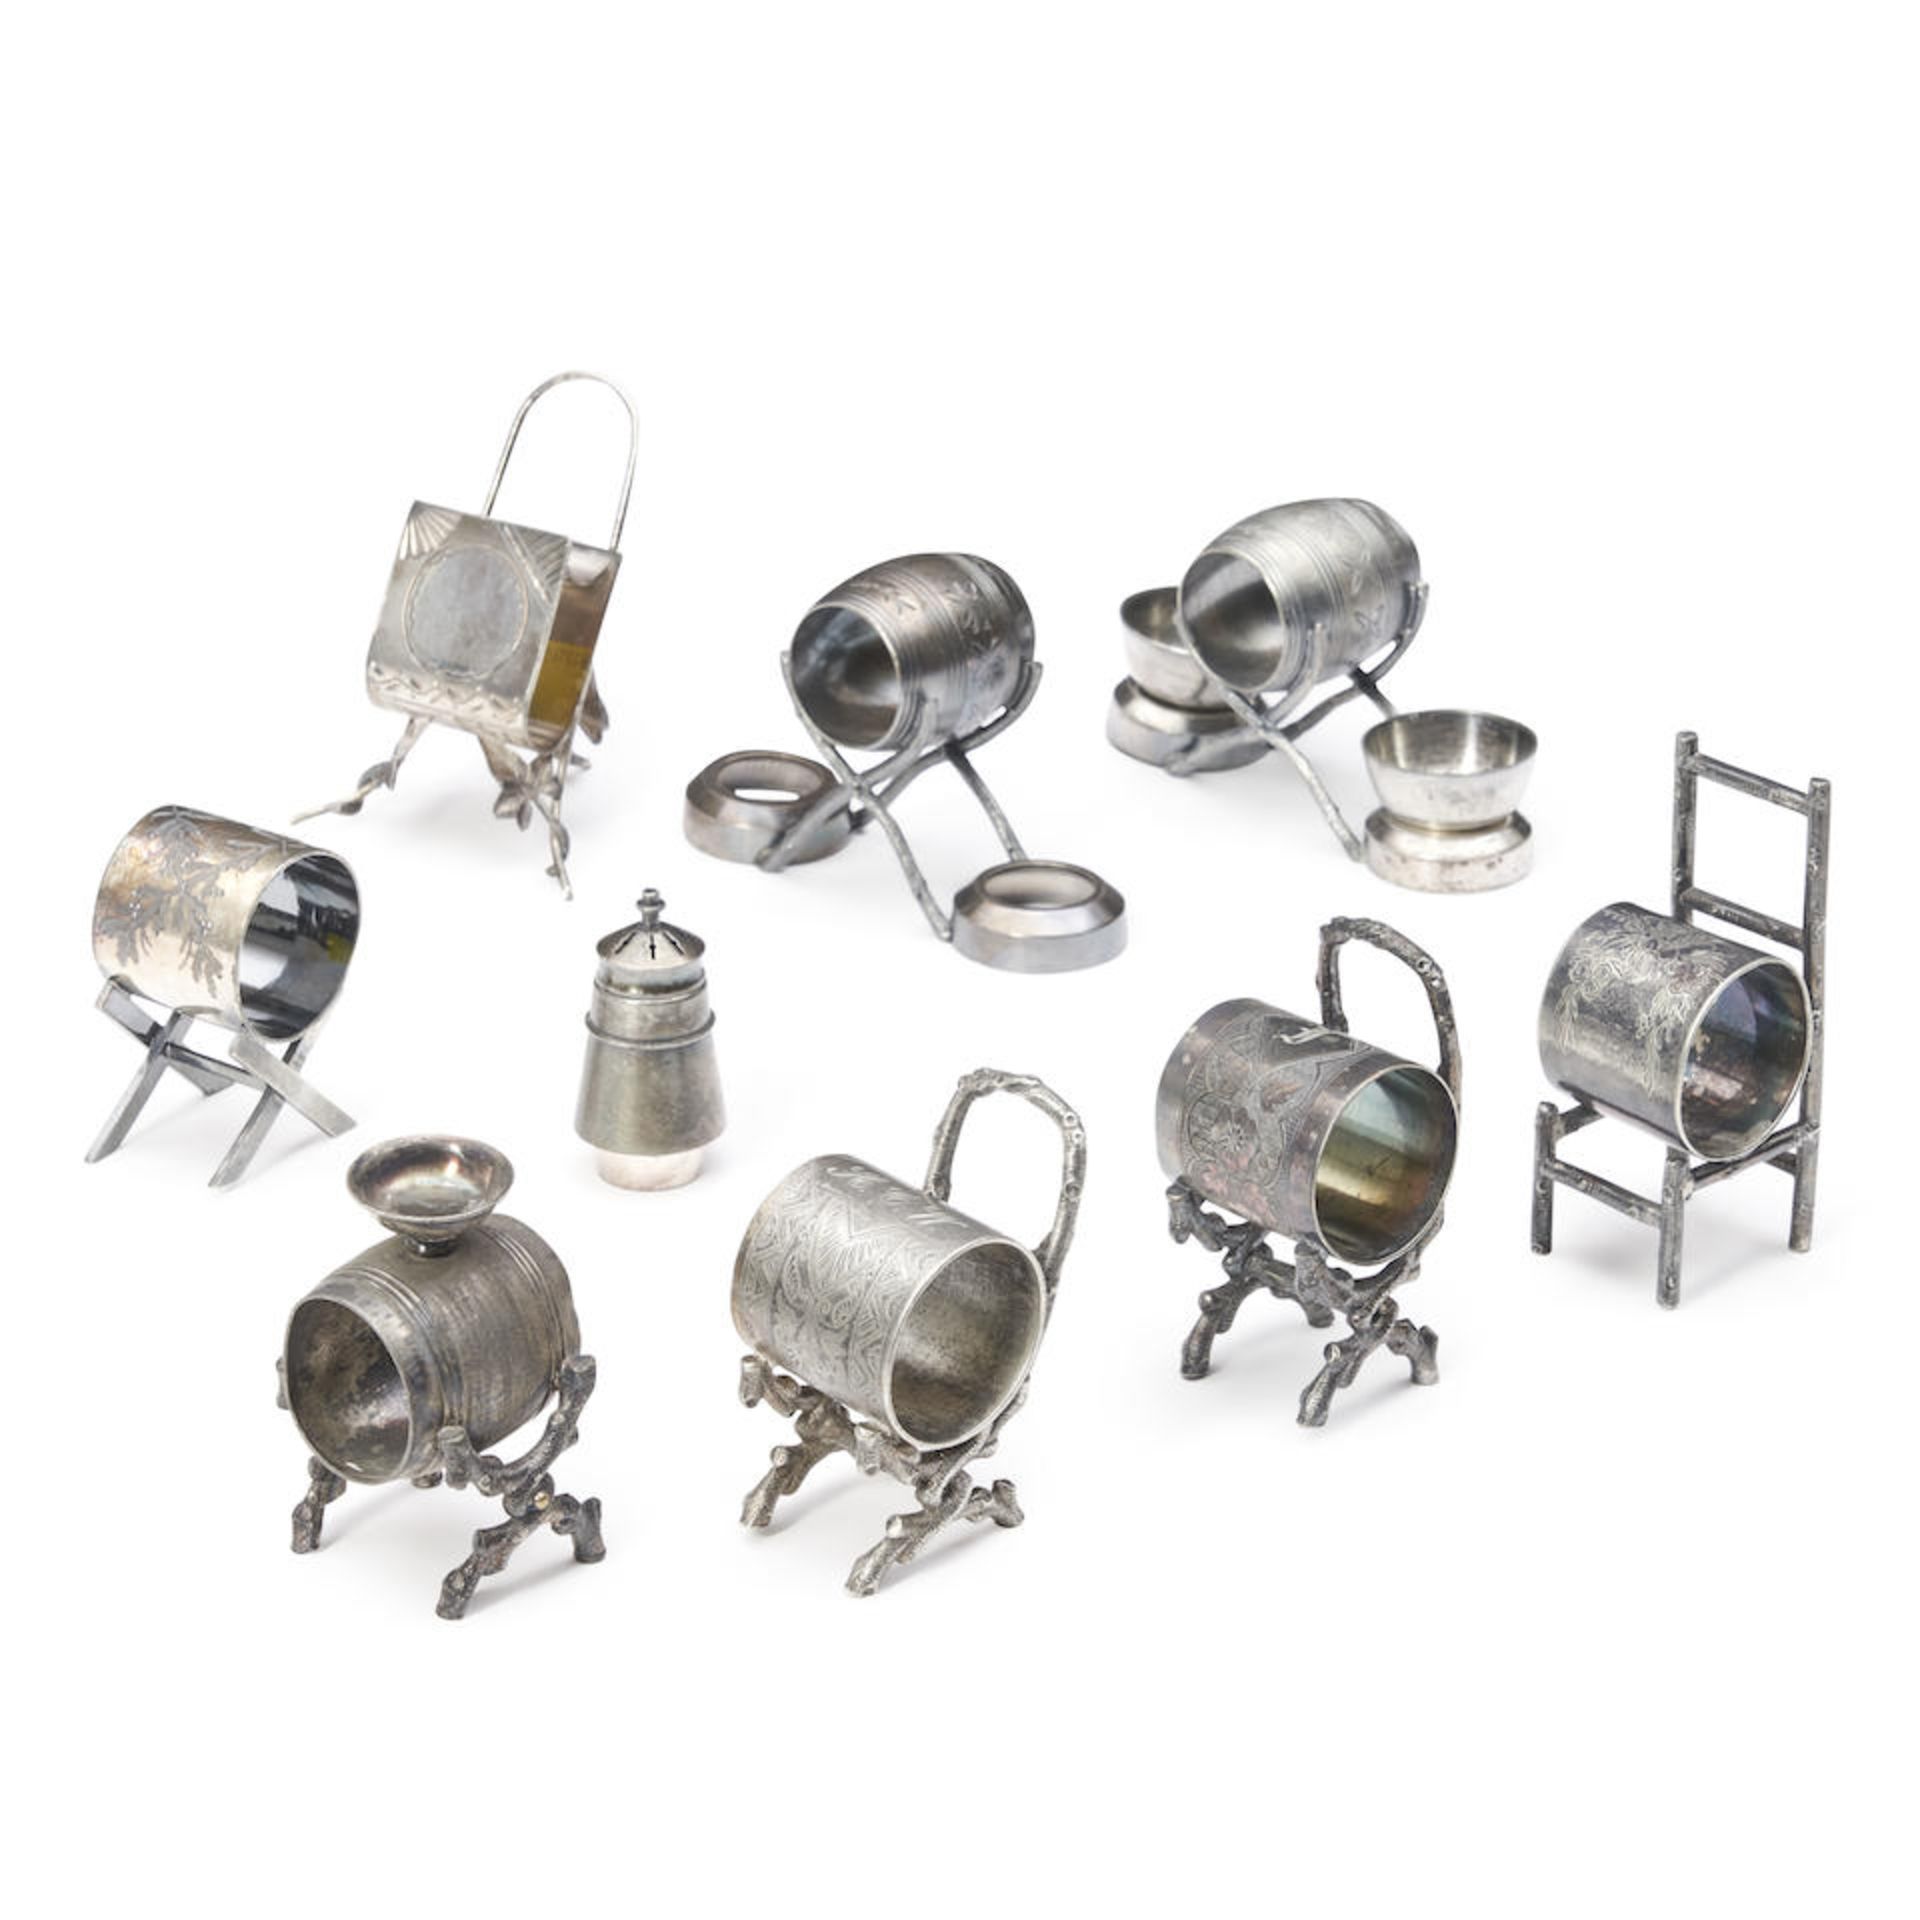 EIGHT SILVER-PLATED NAPKIN RINGS ON CHAIRS AND STOOLS